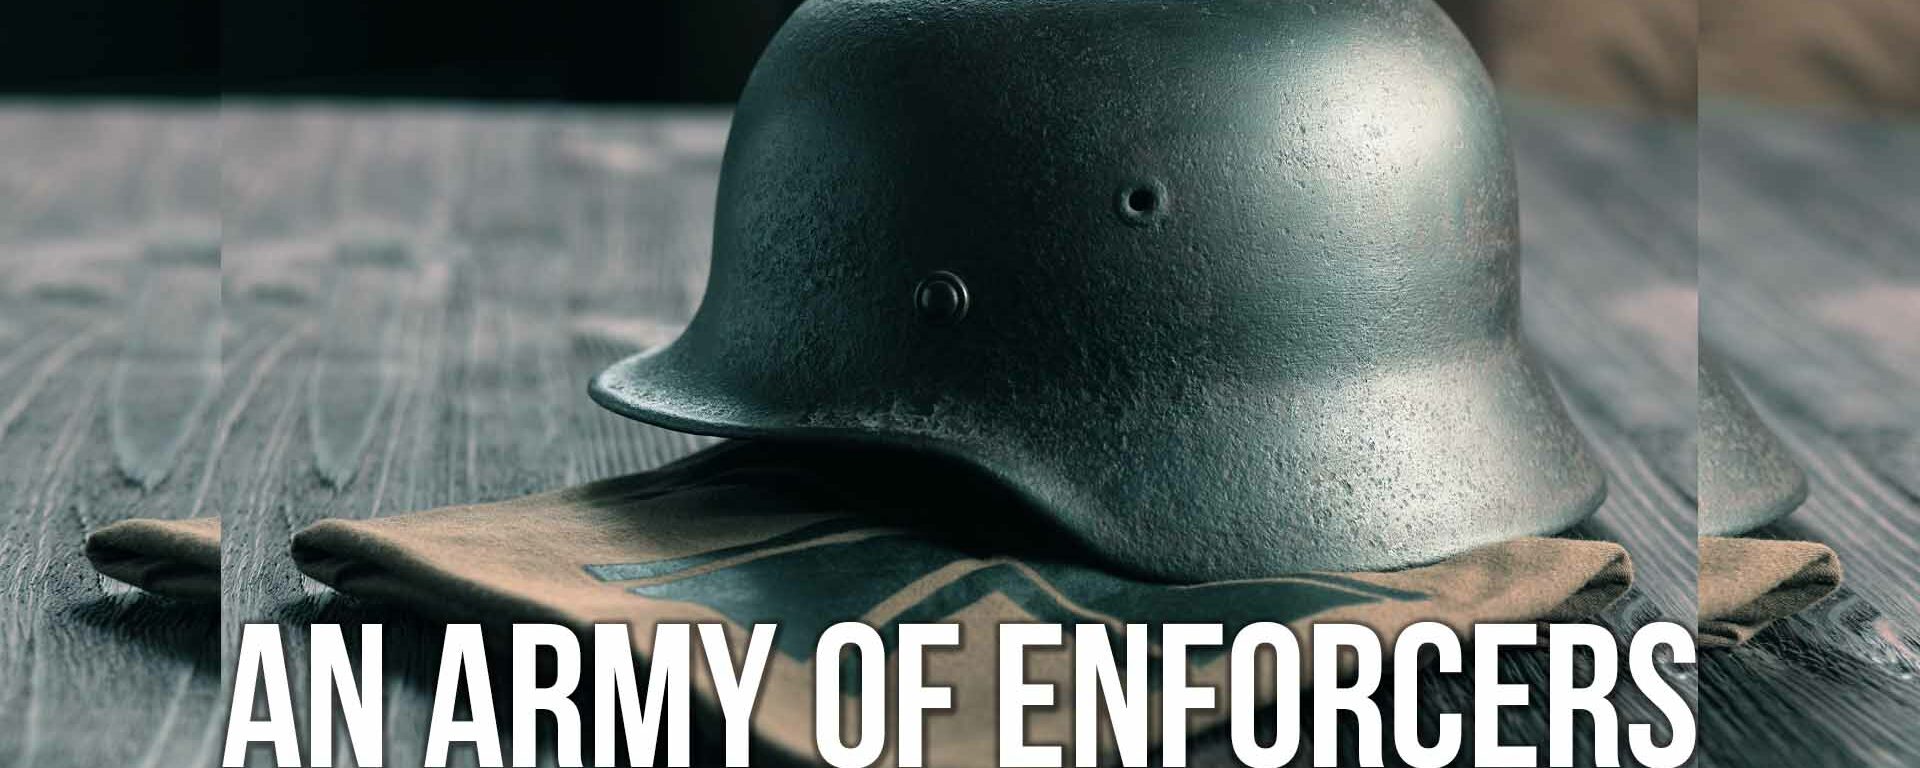 An Army of Enforcers | SOTG 1117 Pt. 2